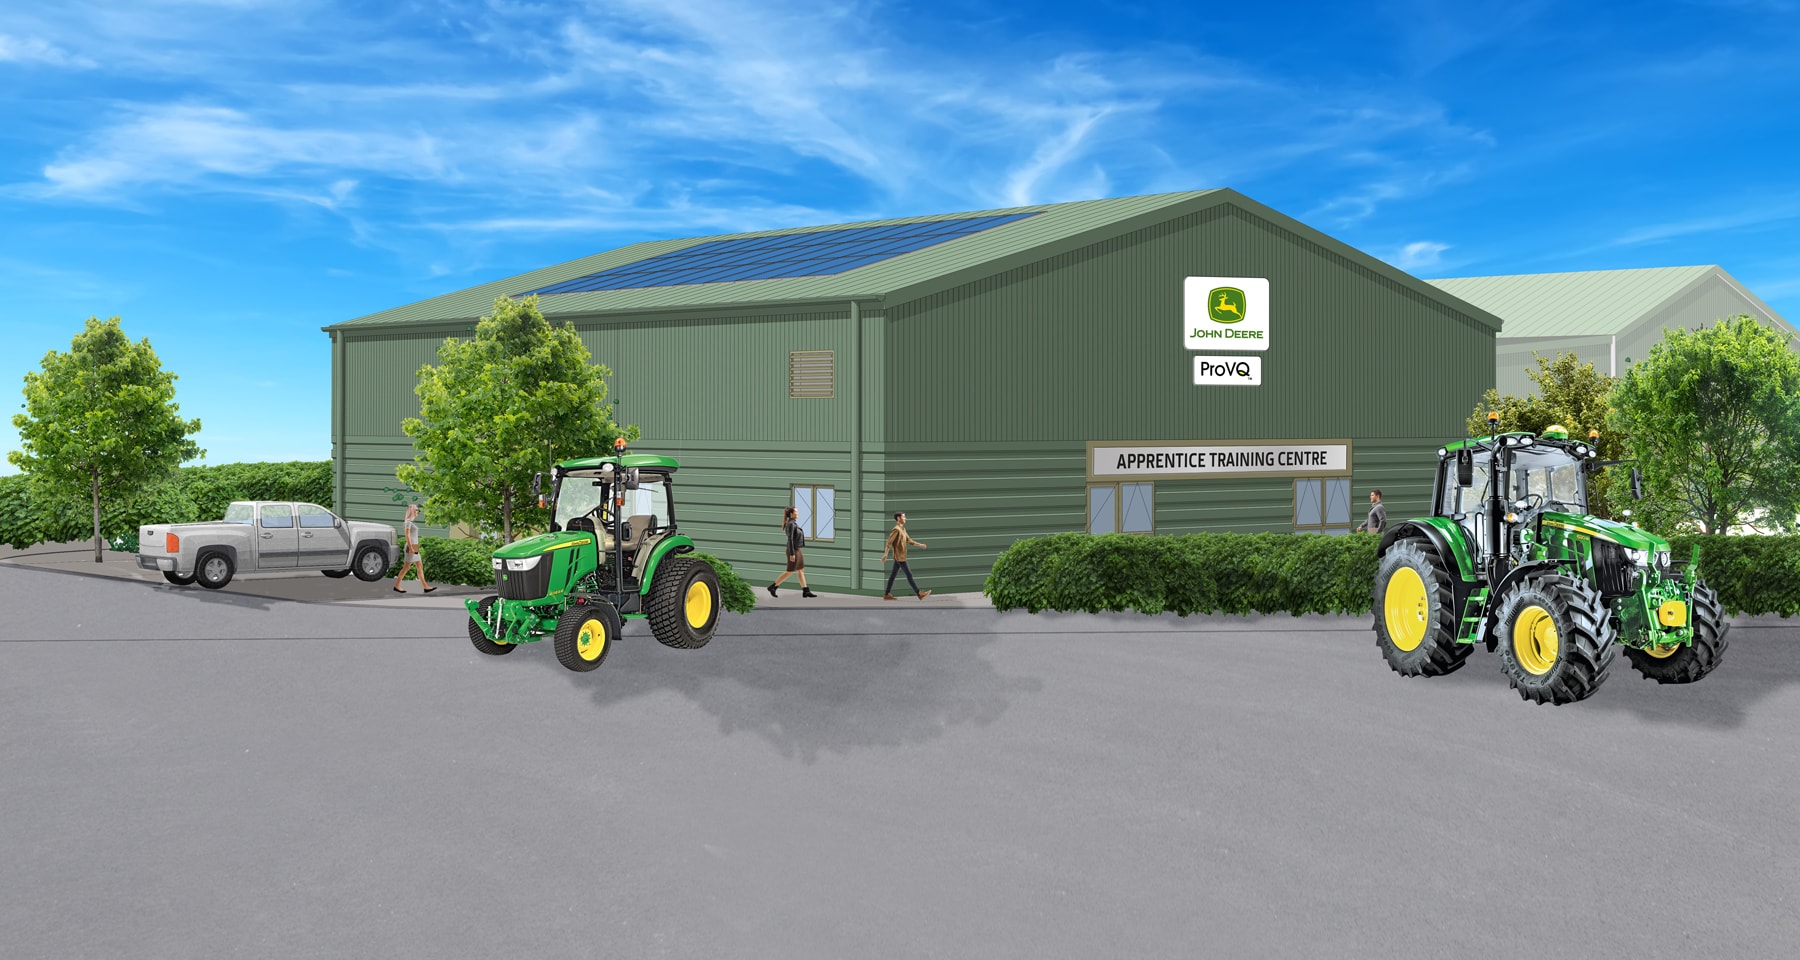 An impression of the new John Deere & ProVQ Apprentice Training Centre, which is due to be officially opened in the autumn.